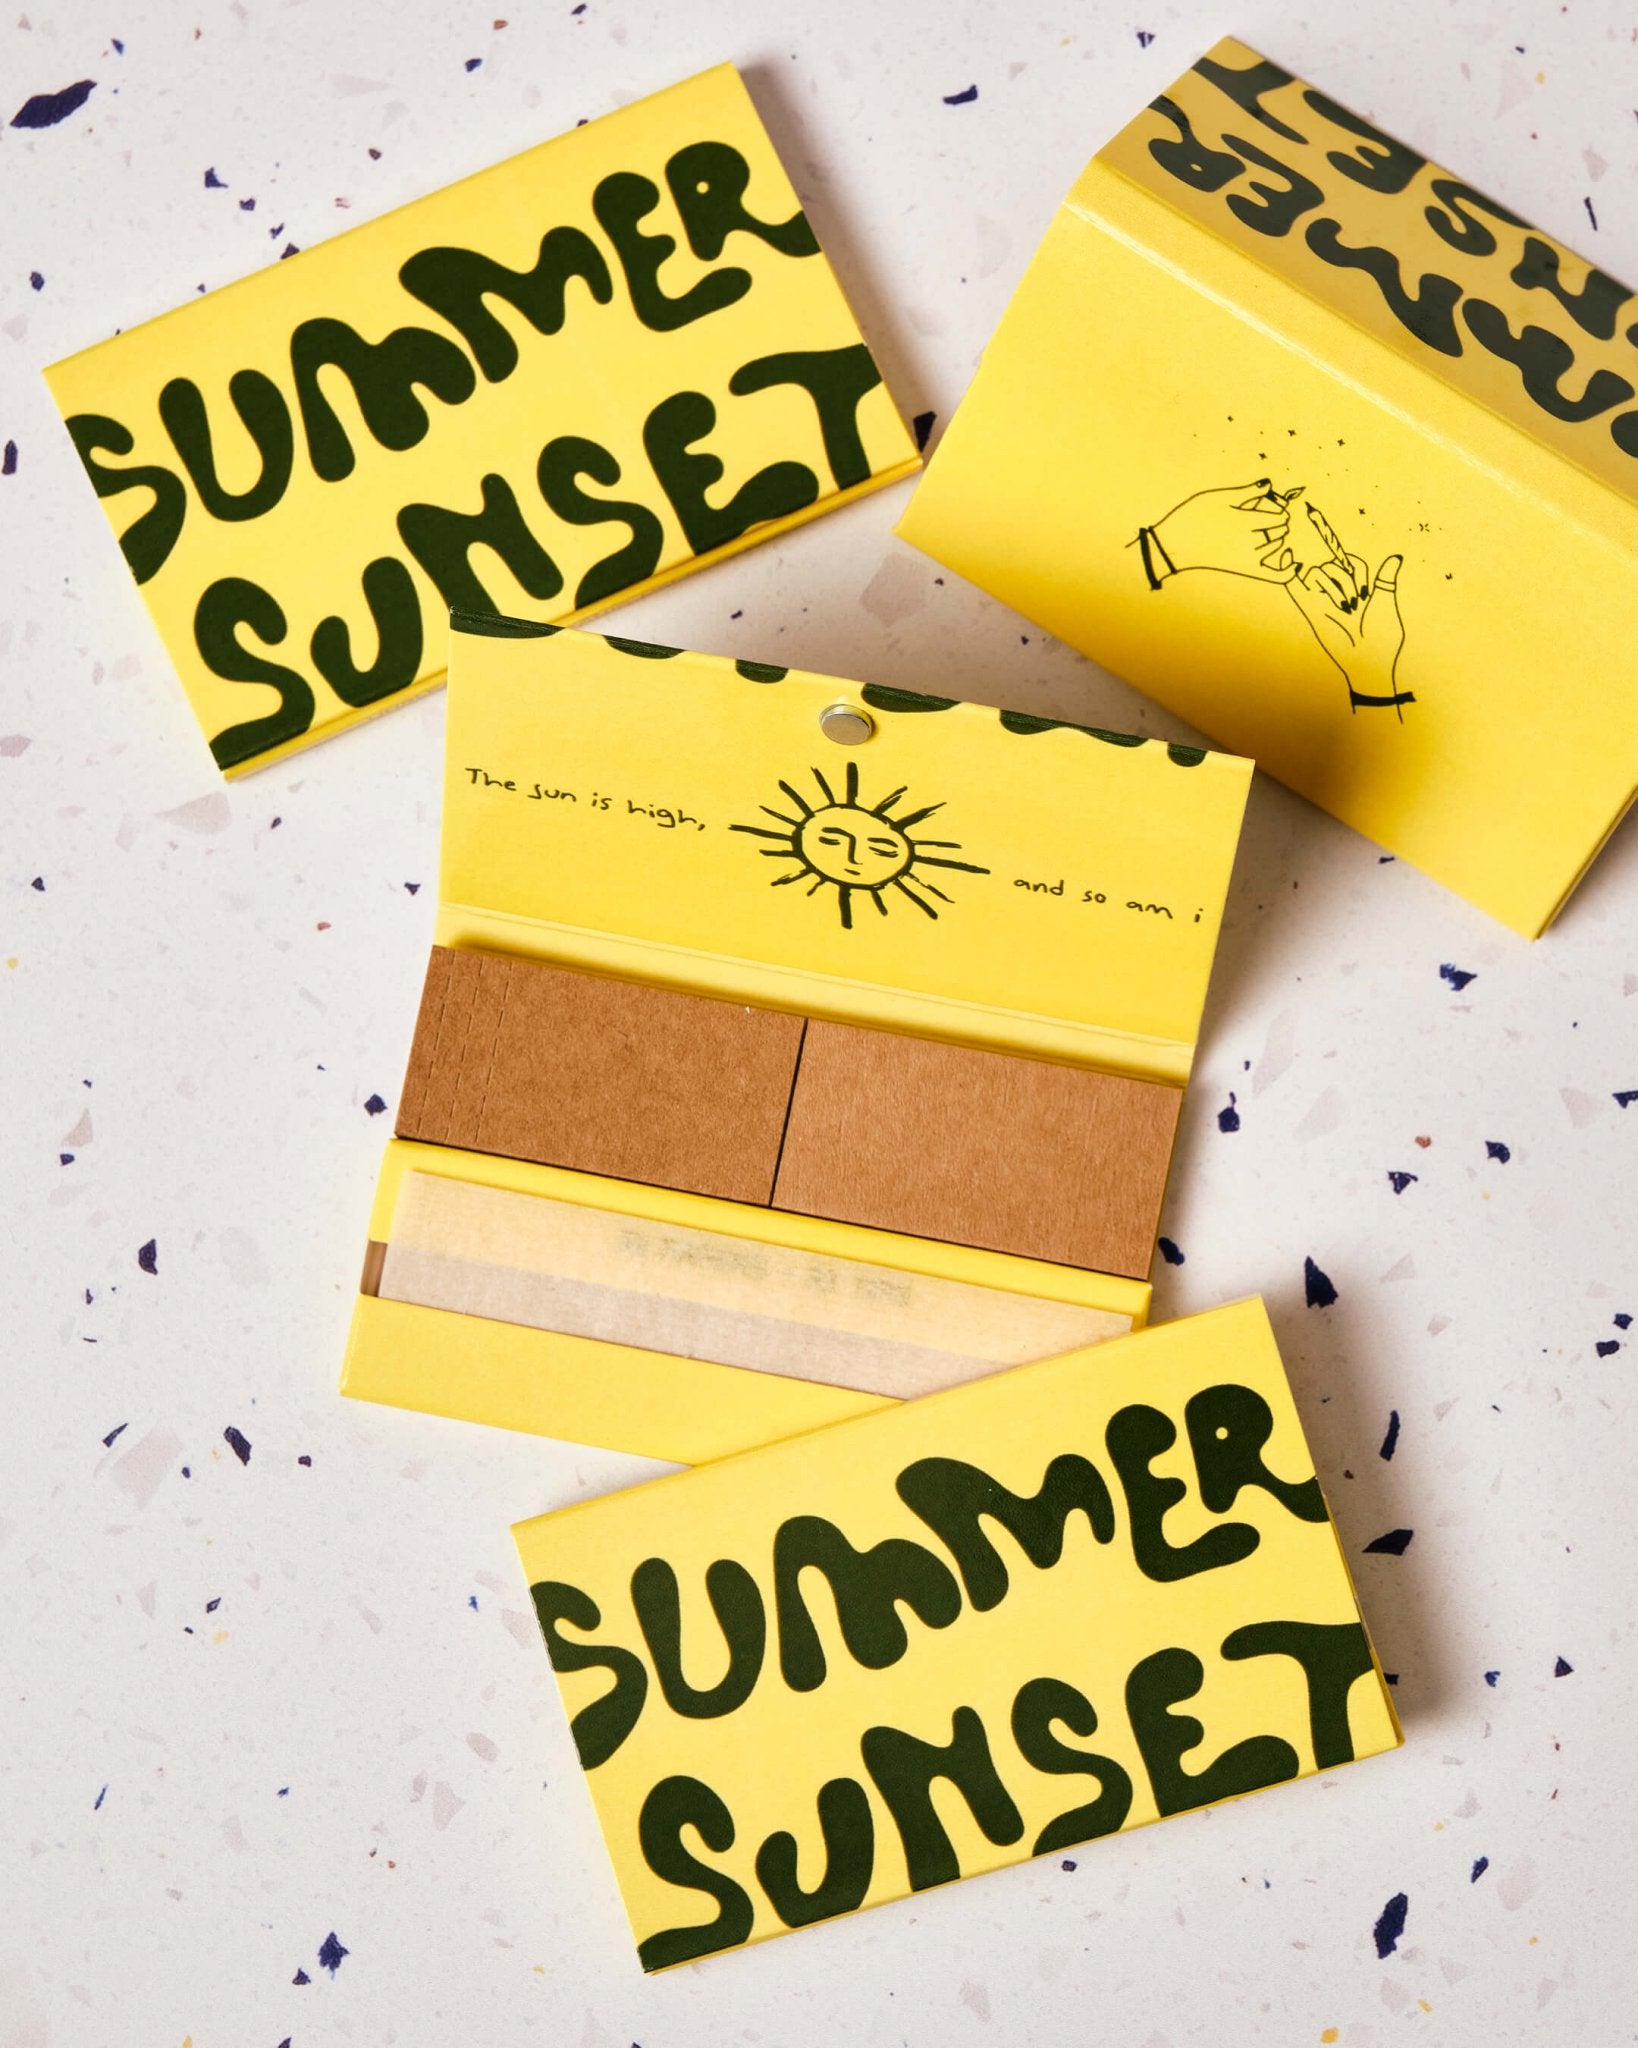 YELLOW ROLLING PAPER KIT (with tips) - Summer Sunset - organic hemp paper - yellow packaging